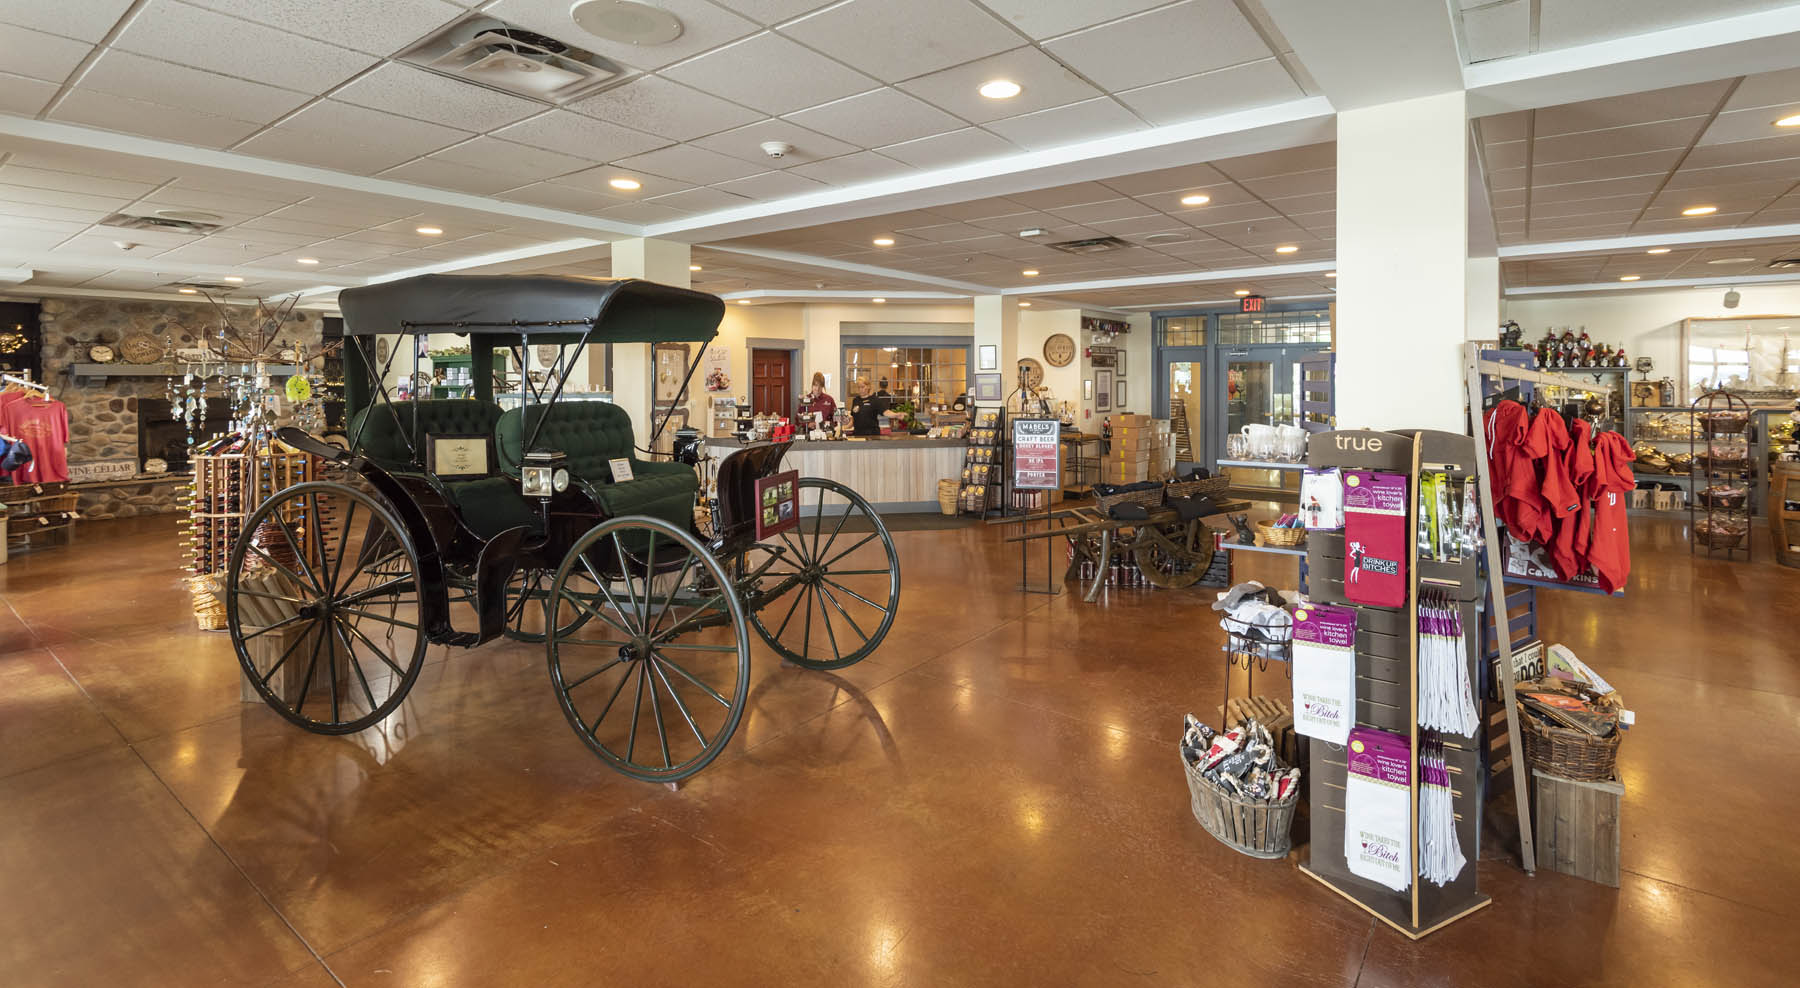 Belhurst gift shop with old carriage as centerpiece.